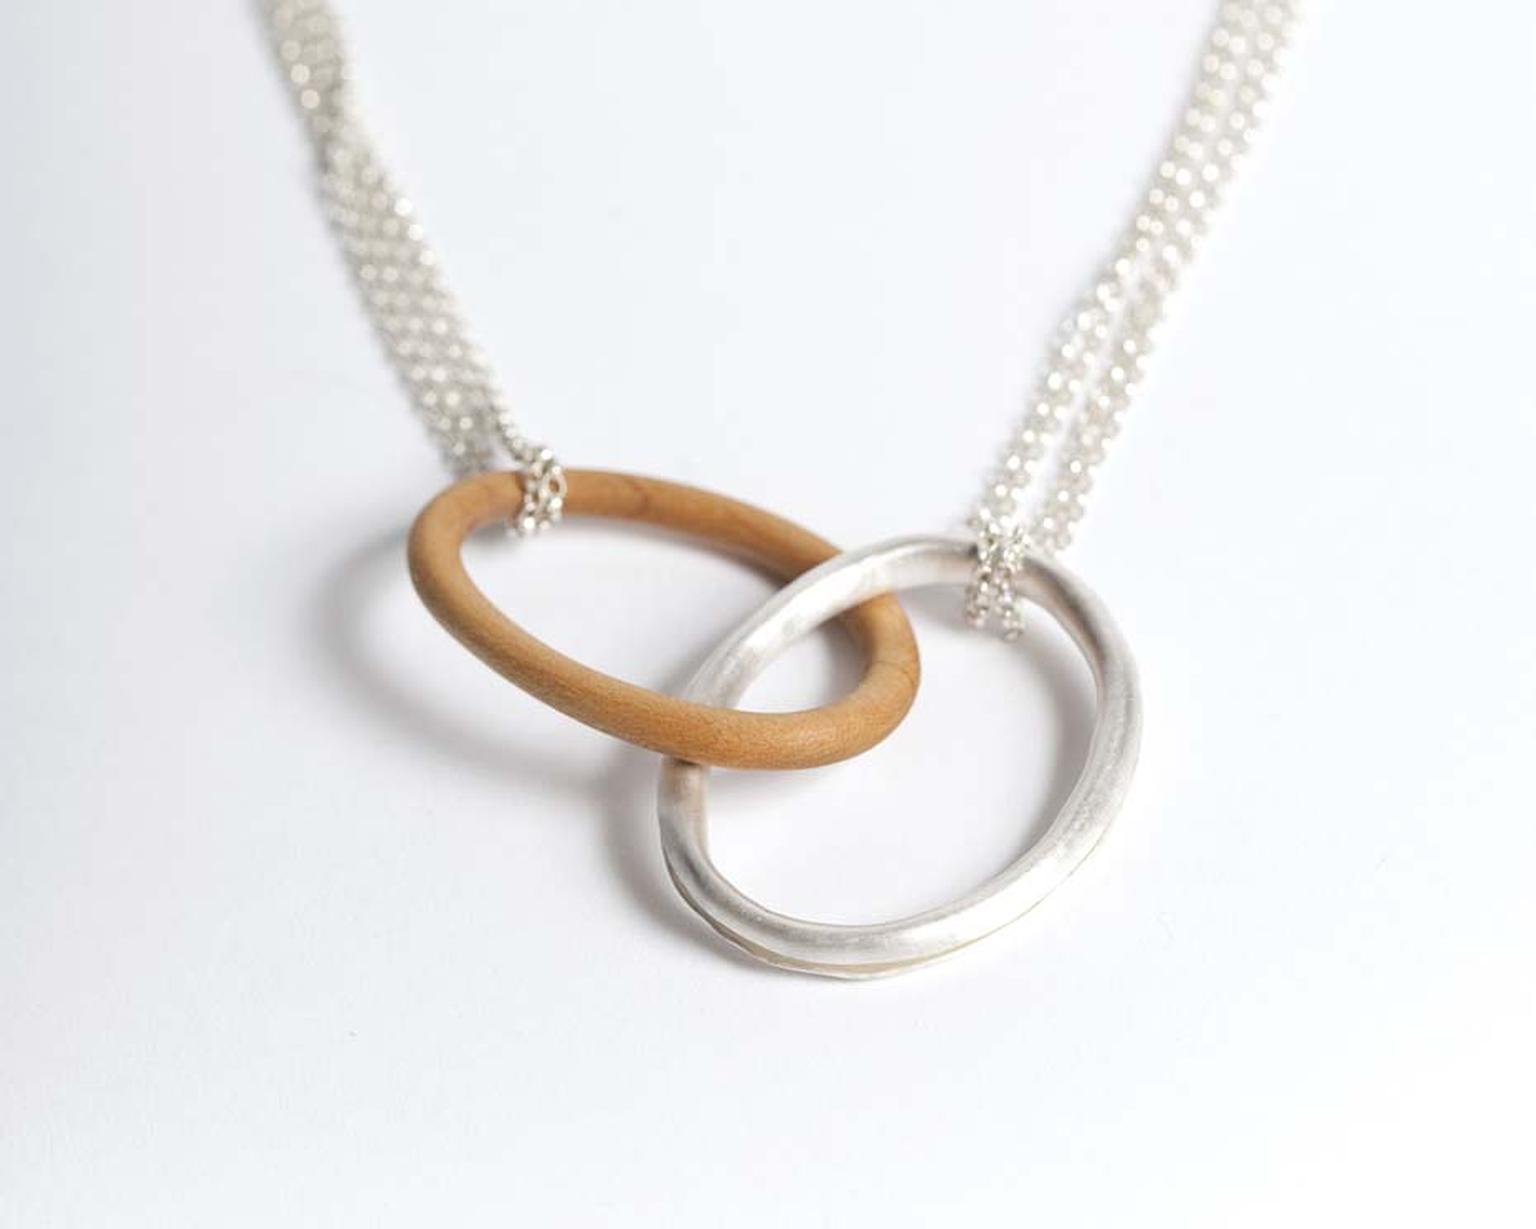 Grace Girvan silver and wood Connect necklace (£280)